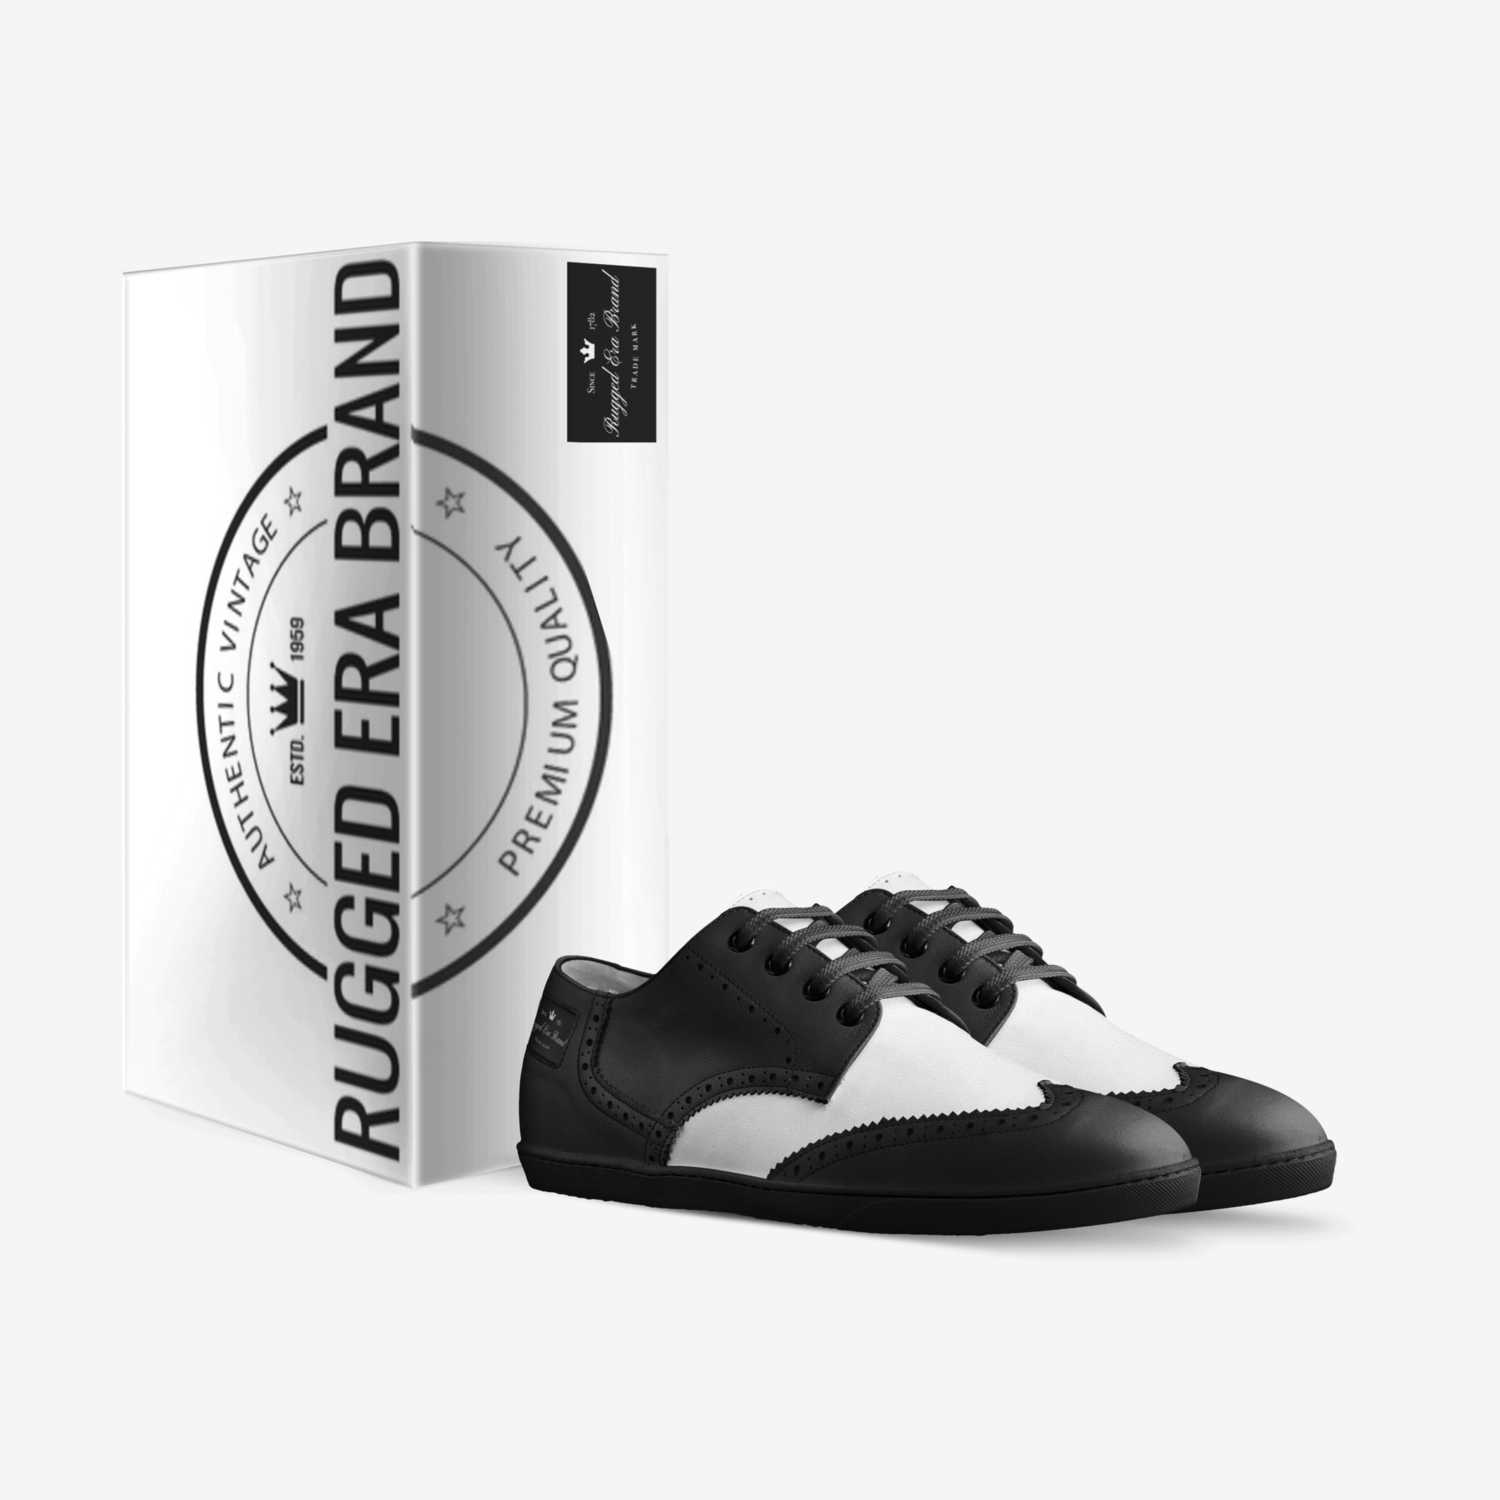 Rugged Era Brand custom made in Italy shoes by Shade Bowman | Box view